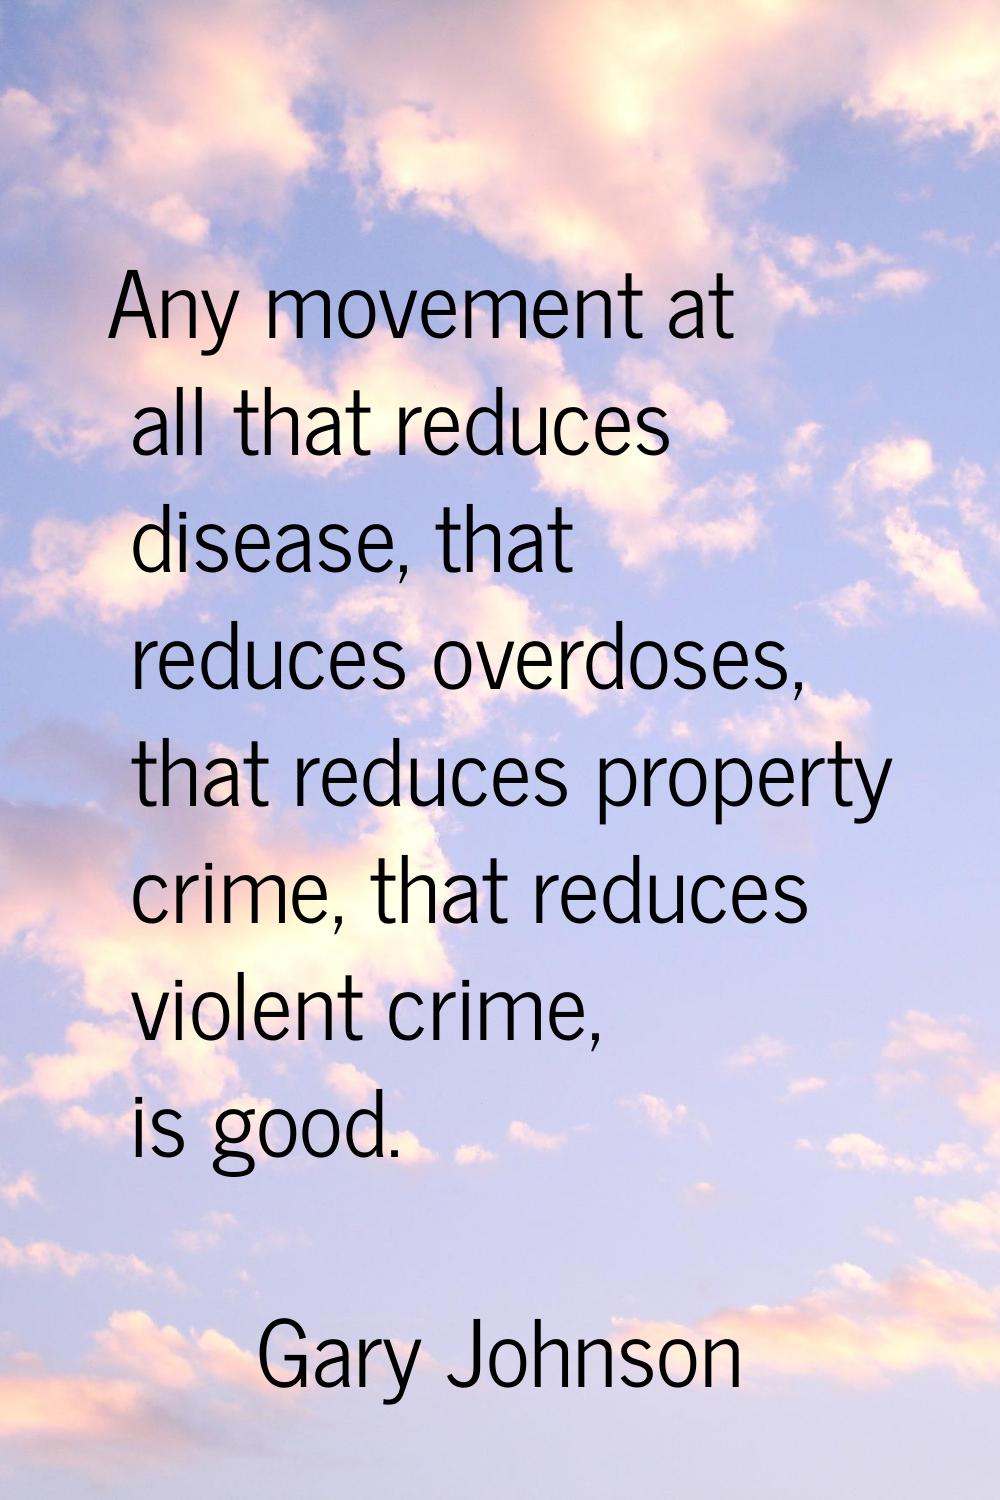 Any movement at all that reduces disease, that reduces overdoses, that reduces property crime, that